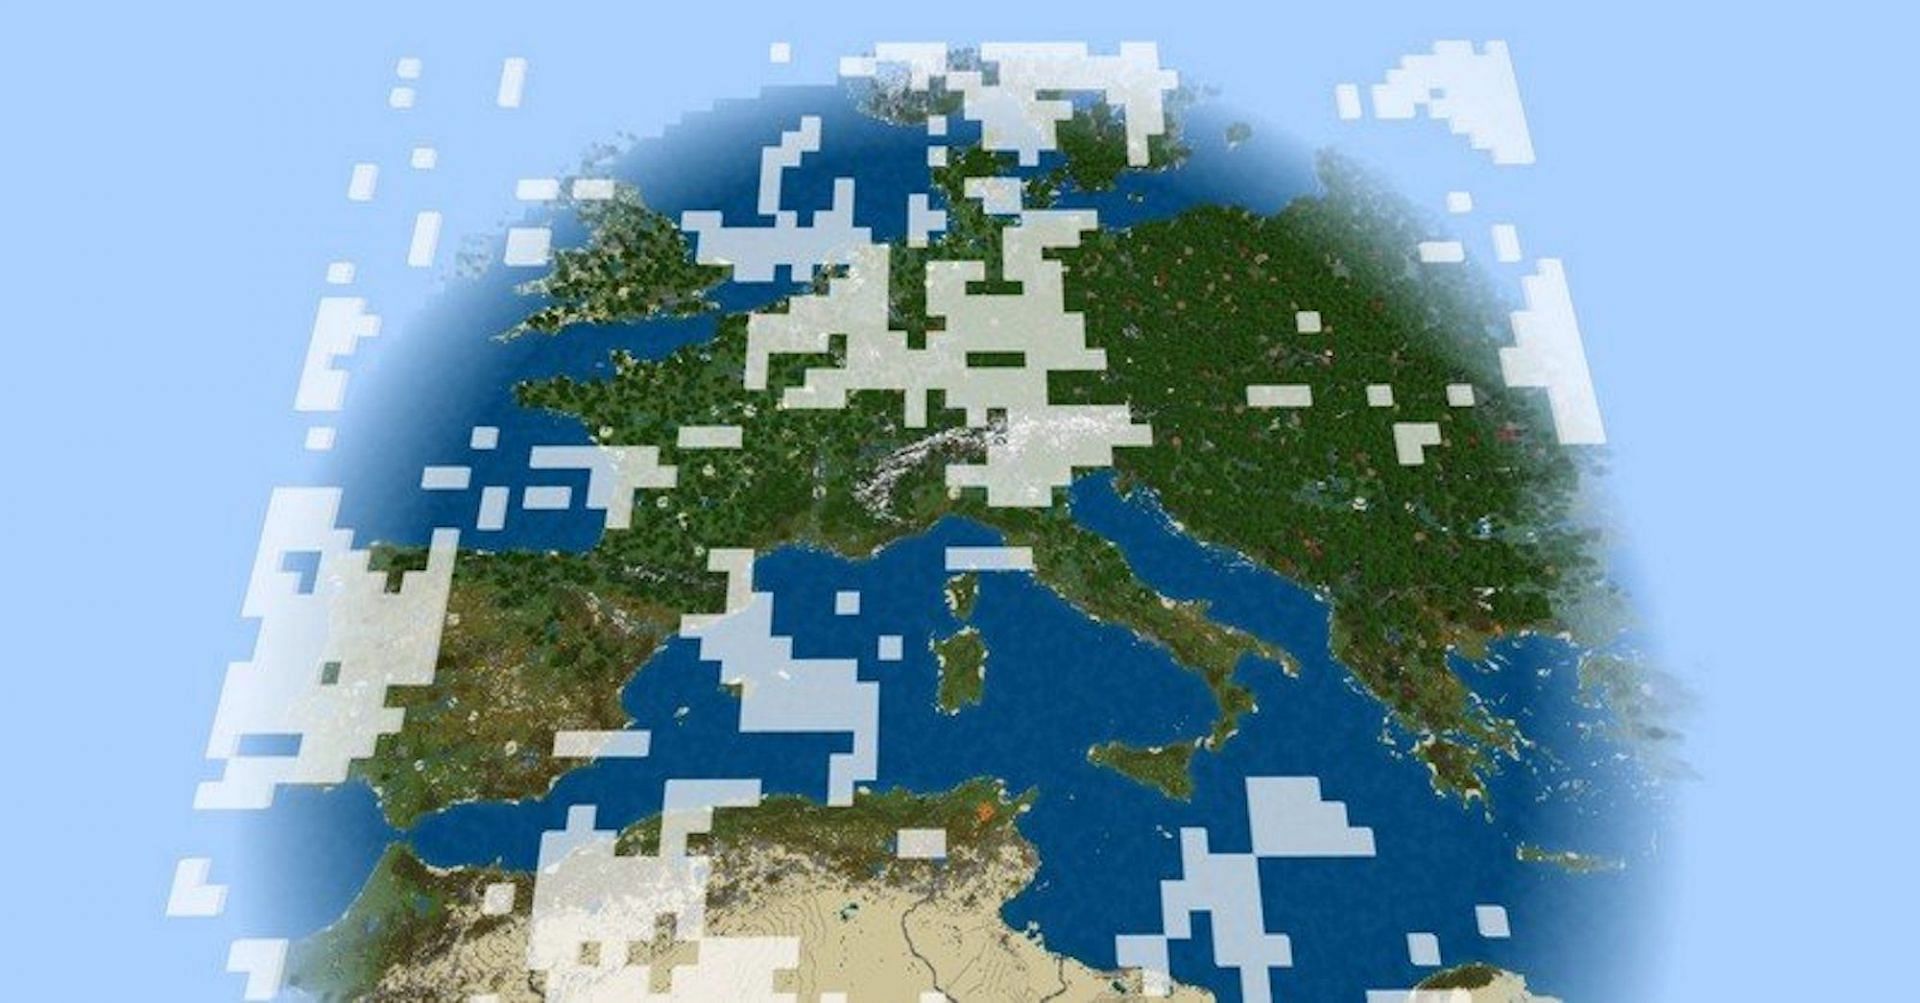 minecraft windows 10 earth map download 1.14